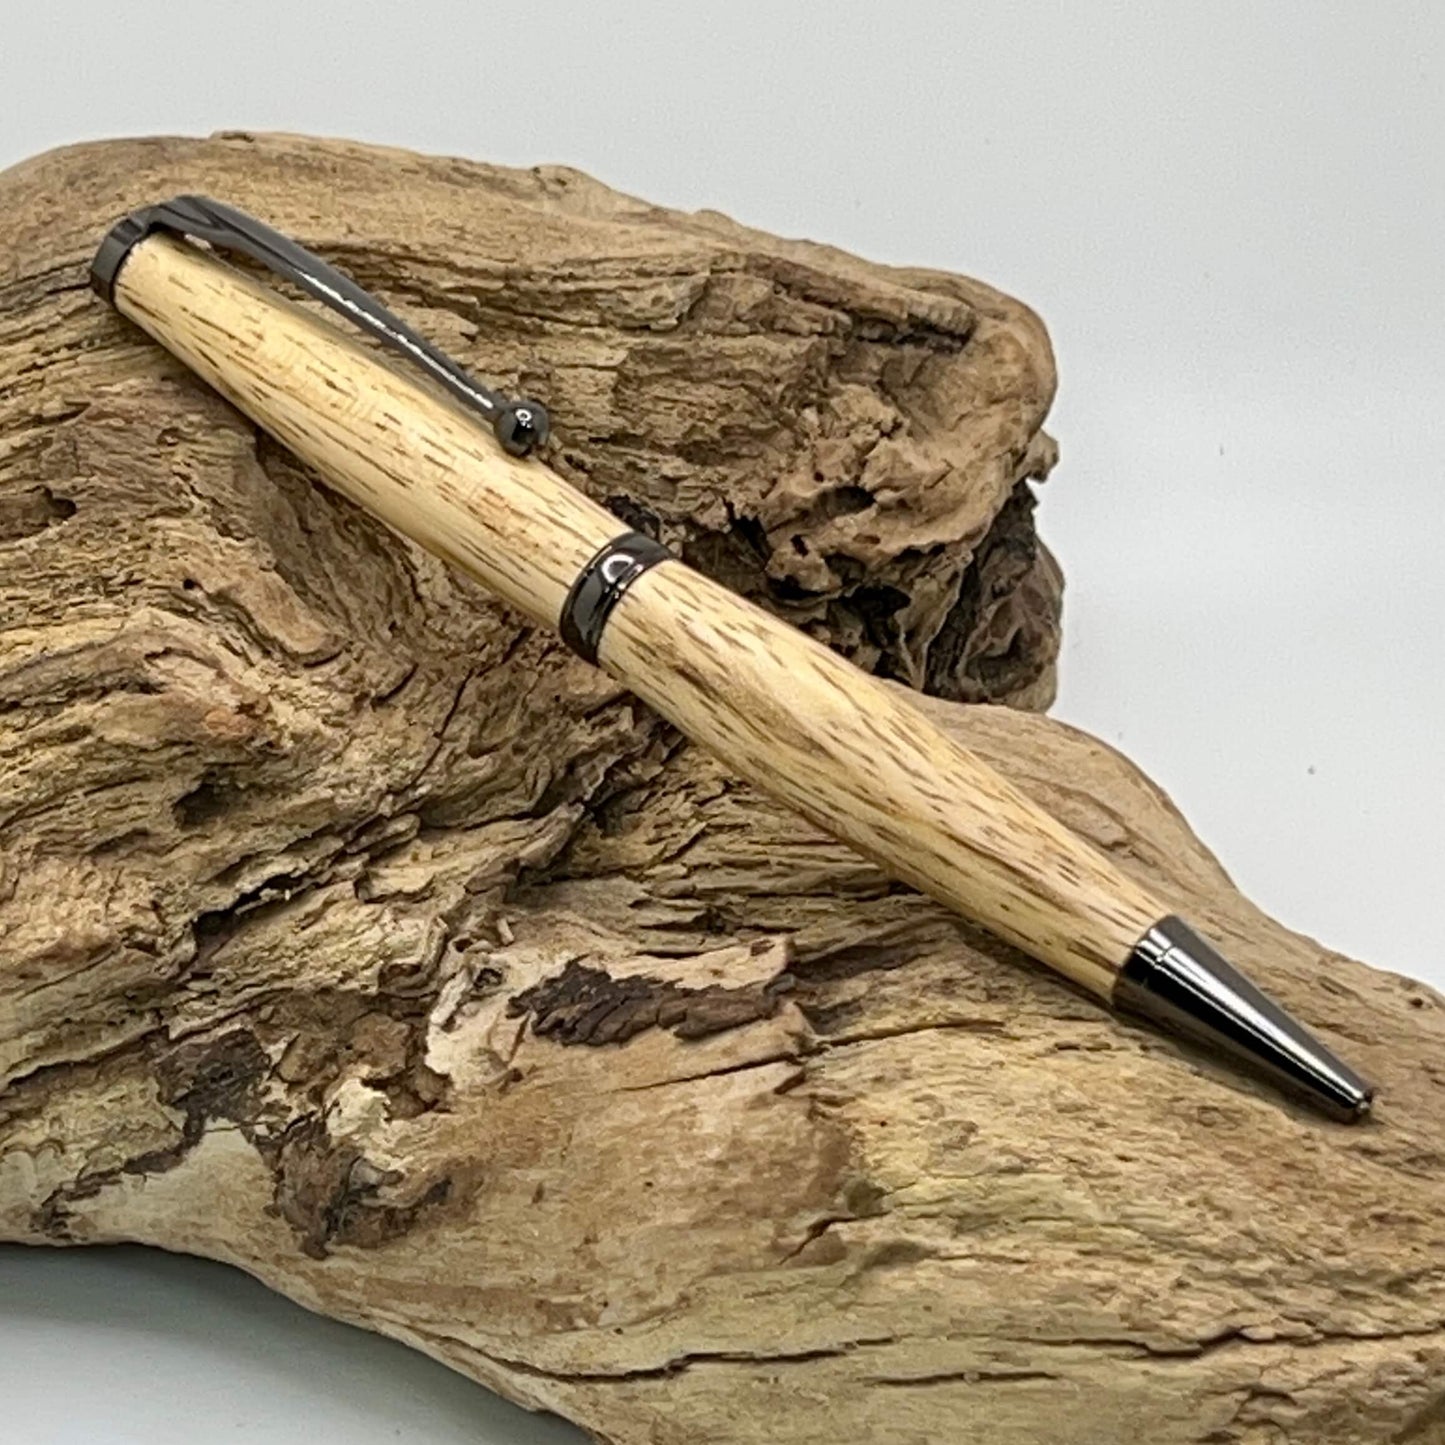 Handcrafted Tamarind Wood pen setting on driftwood